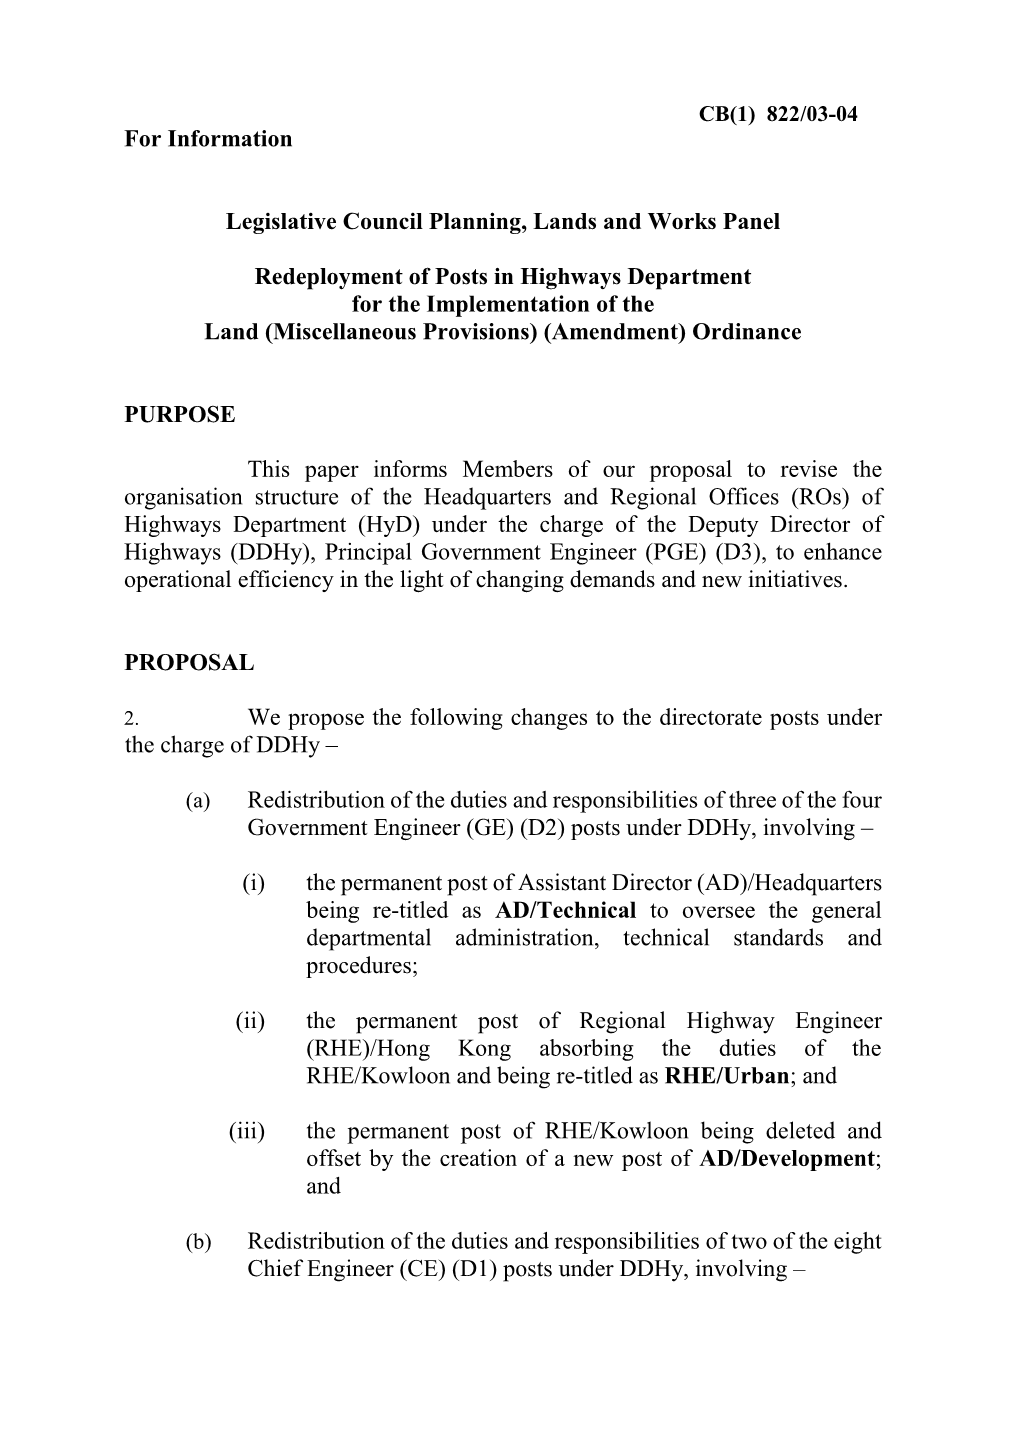 Information Paper on "Redeployment of Posts in Highways Department